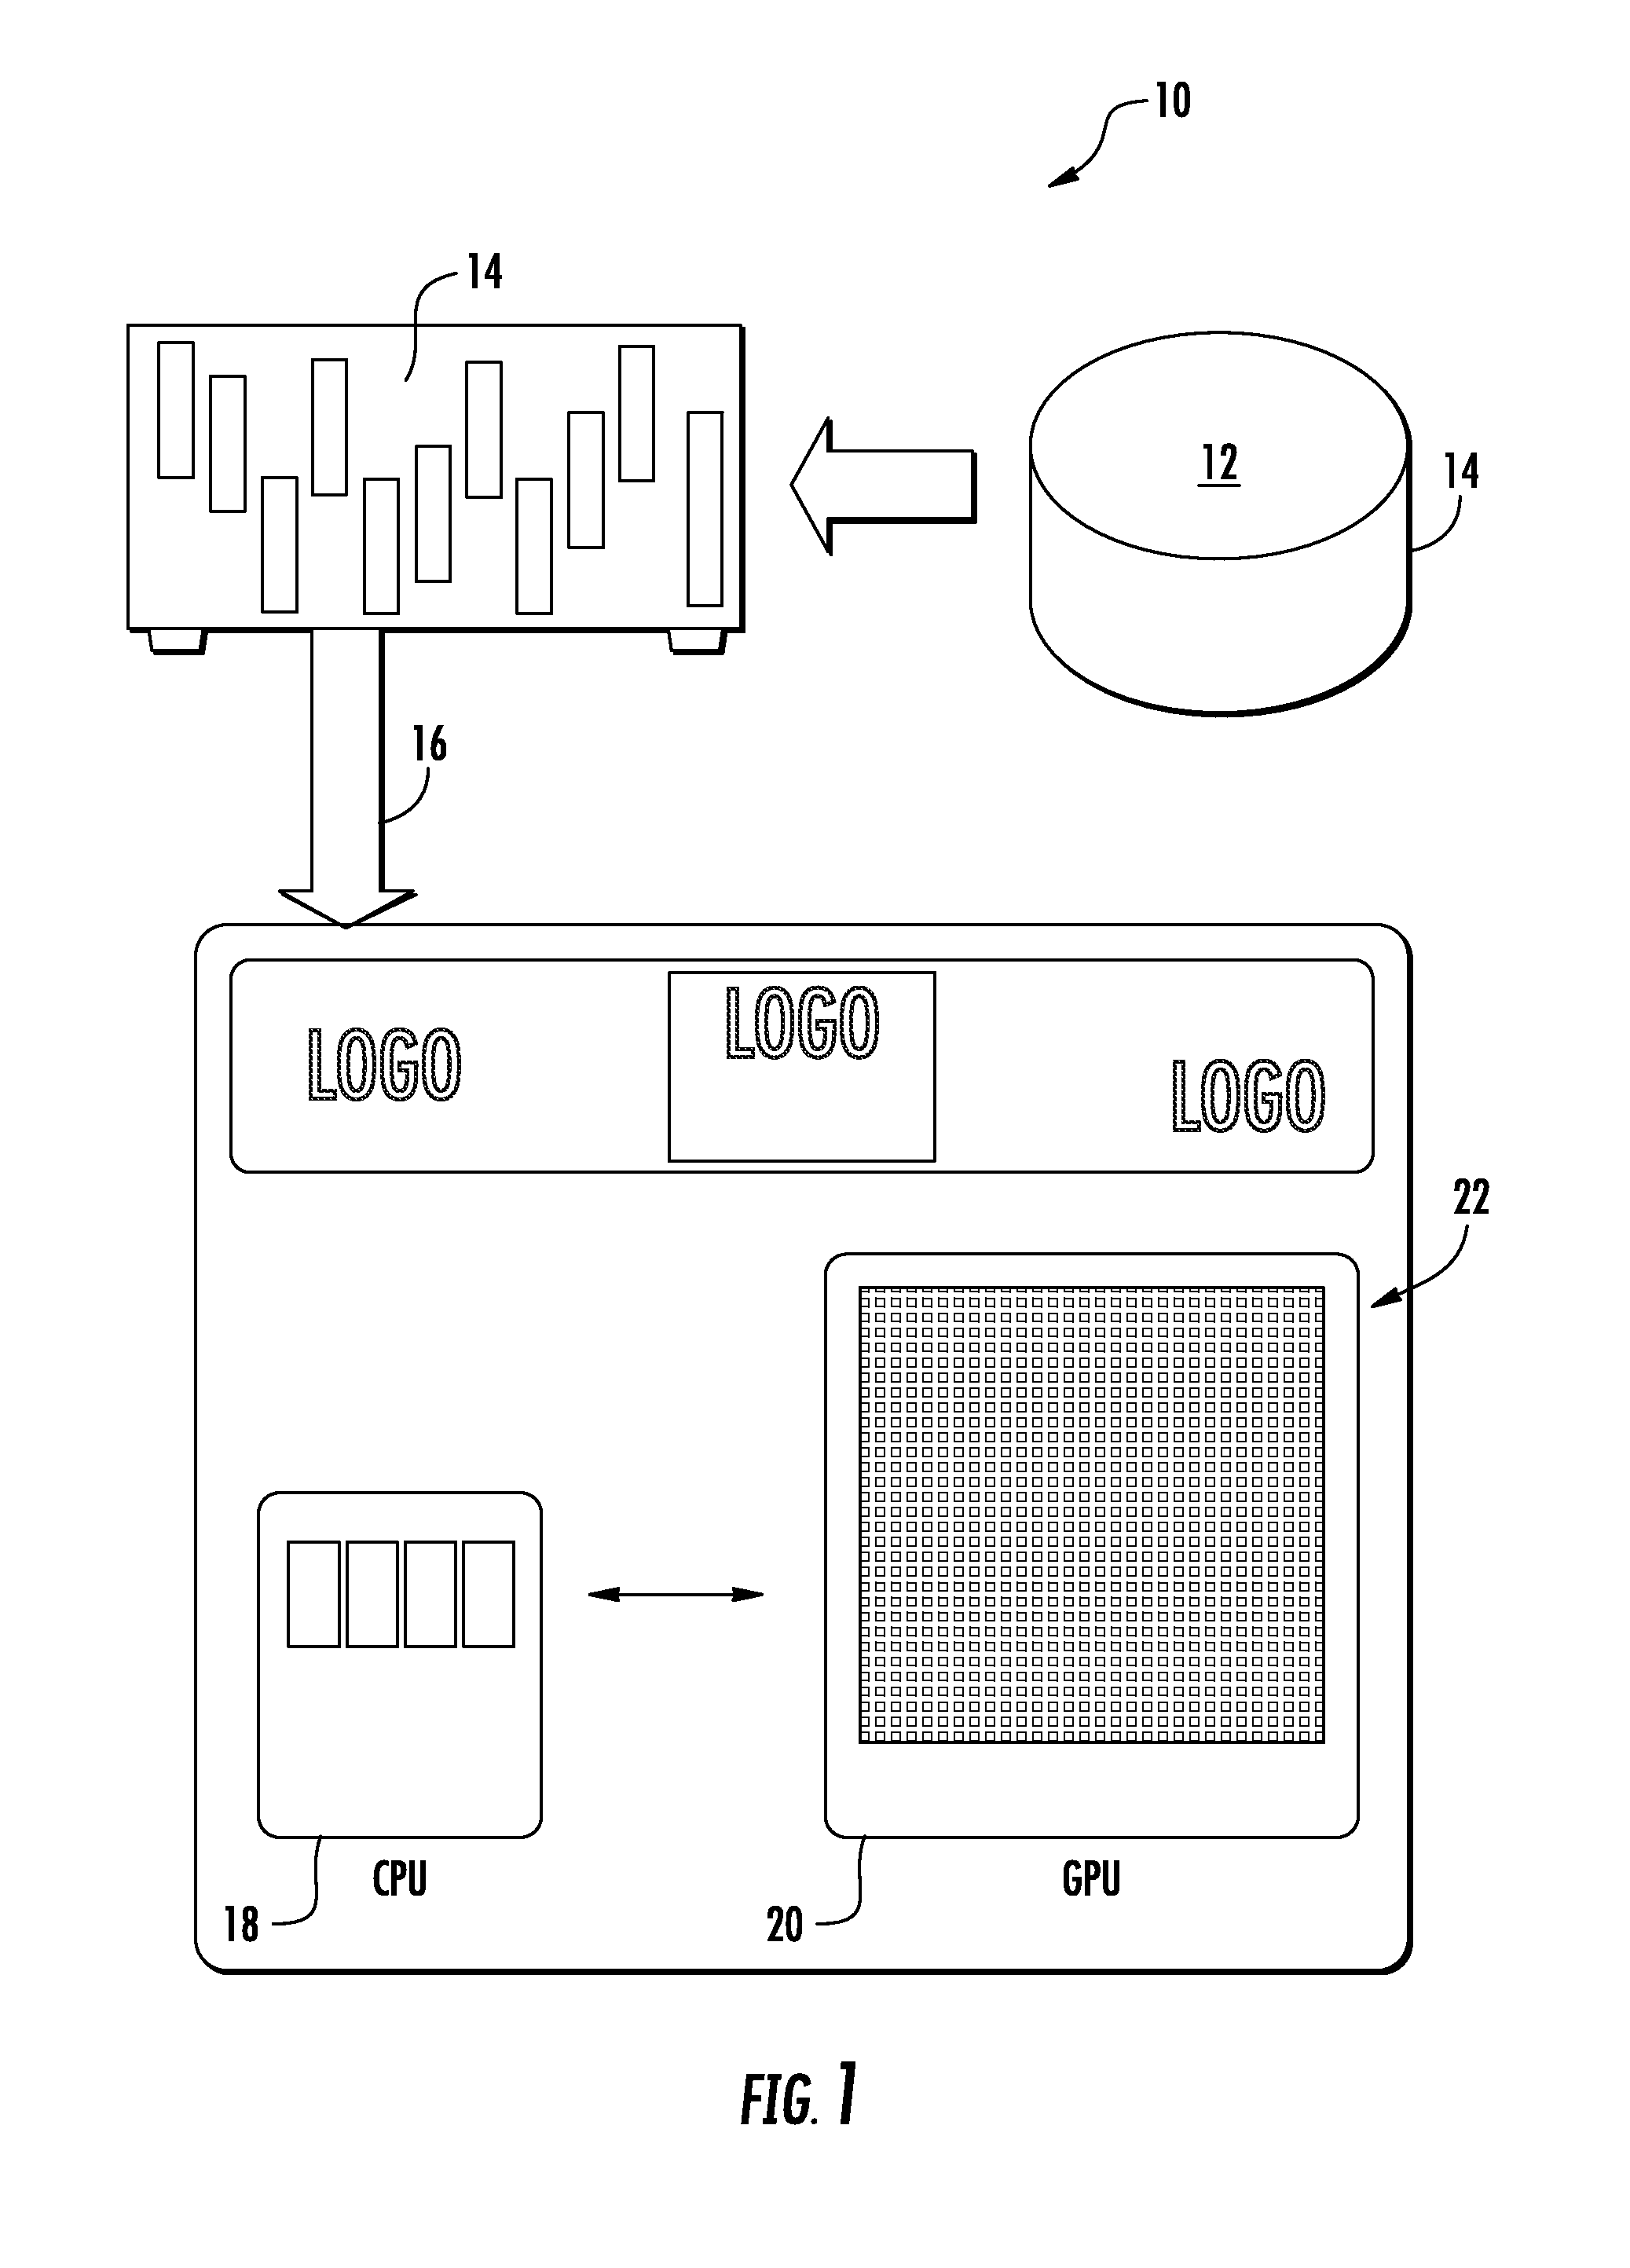 In-memory aggregation system and method of multidimensional data processing for enhancing speed and scalability